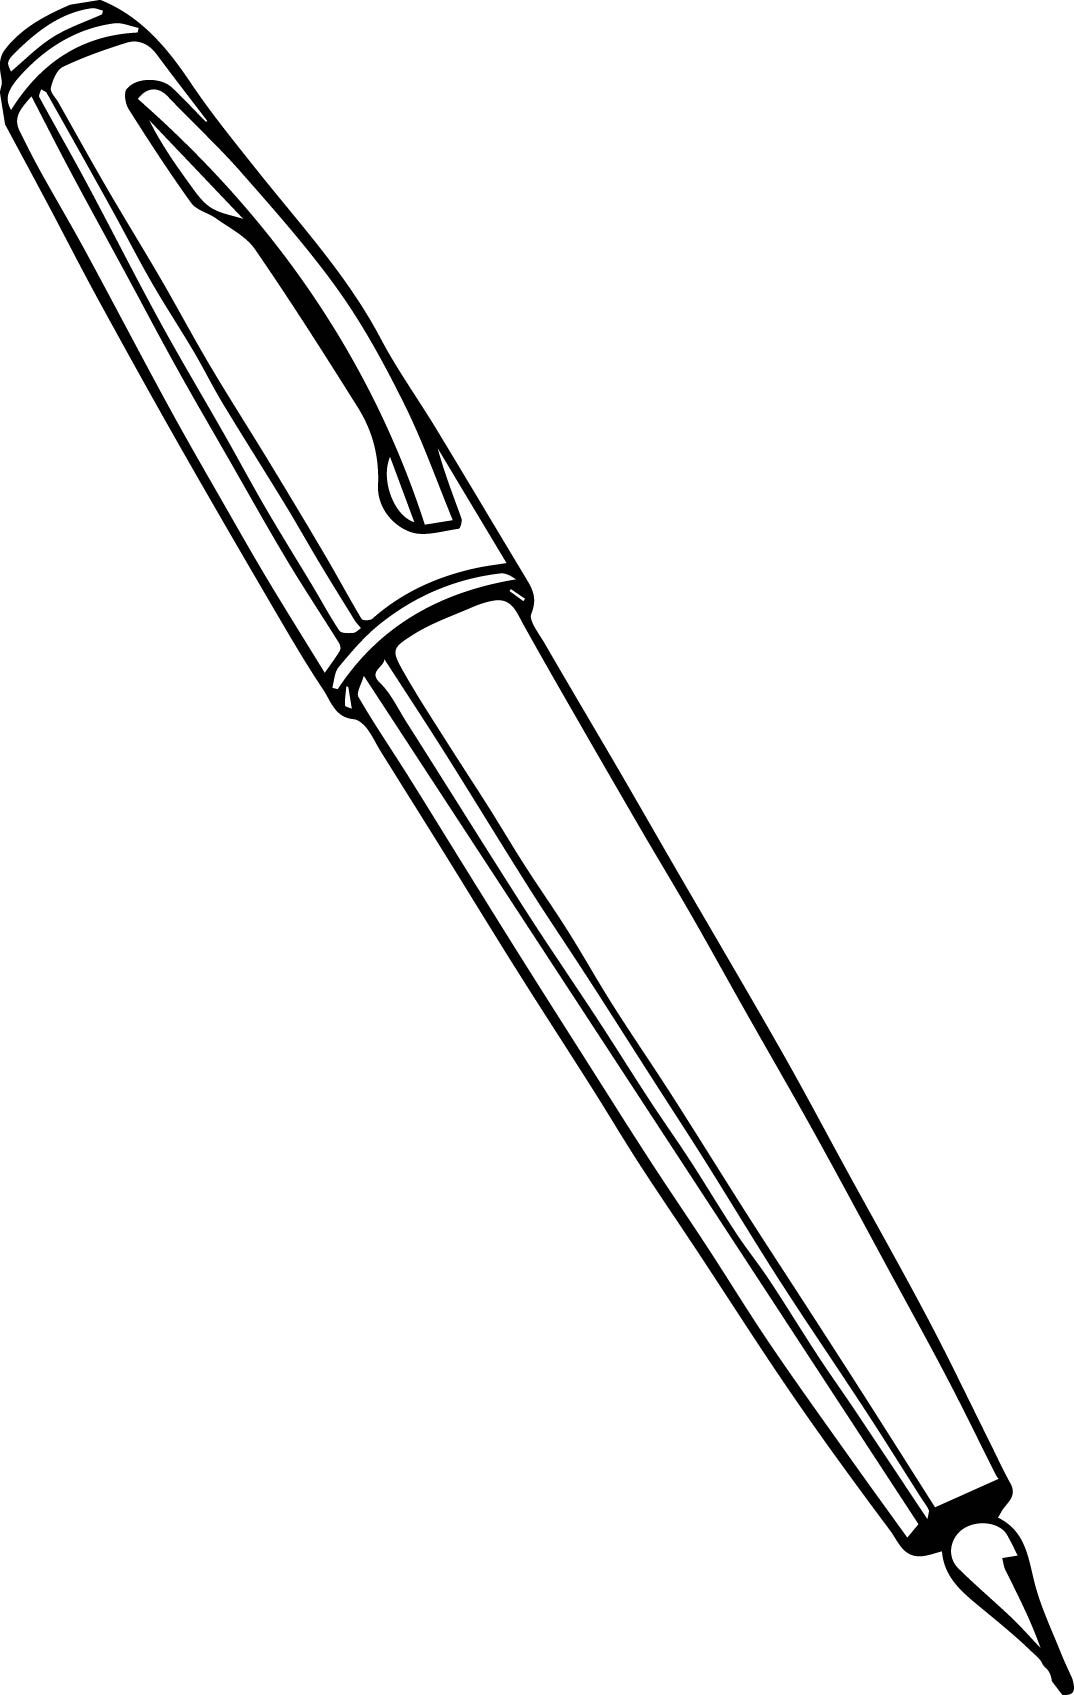 awesome Calligraphy Pen Cartoon Coloring Pages Check more at  http://wecoloringpage.com/calligraphy-pen-cartoo… | Calligraphy pens,  Coloring pictures, Coloring pages